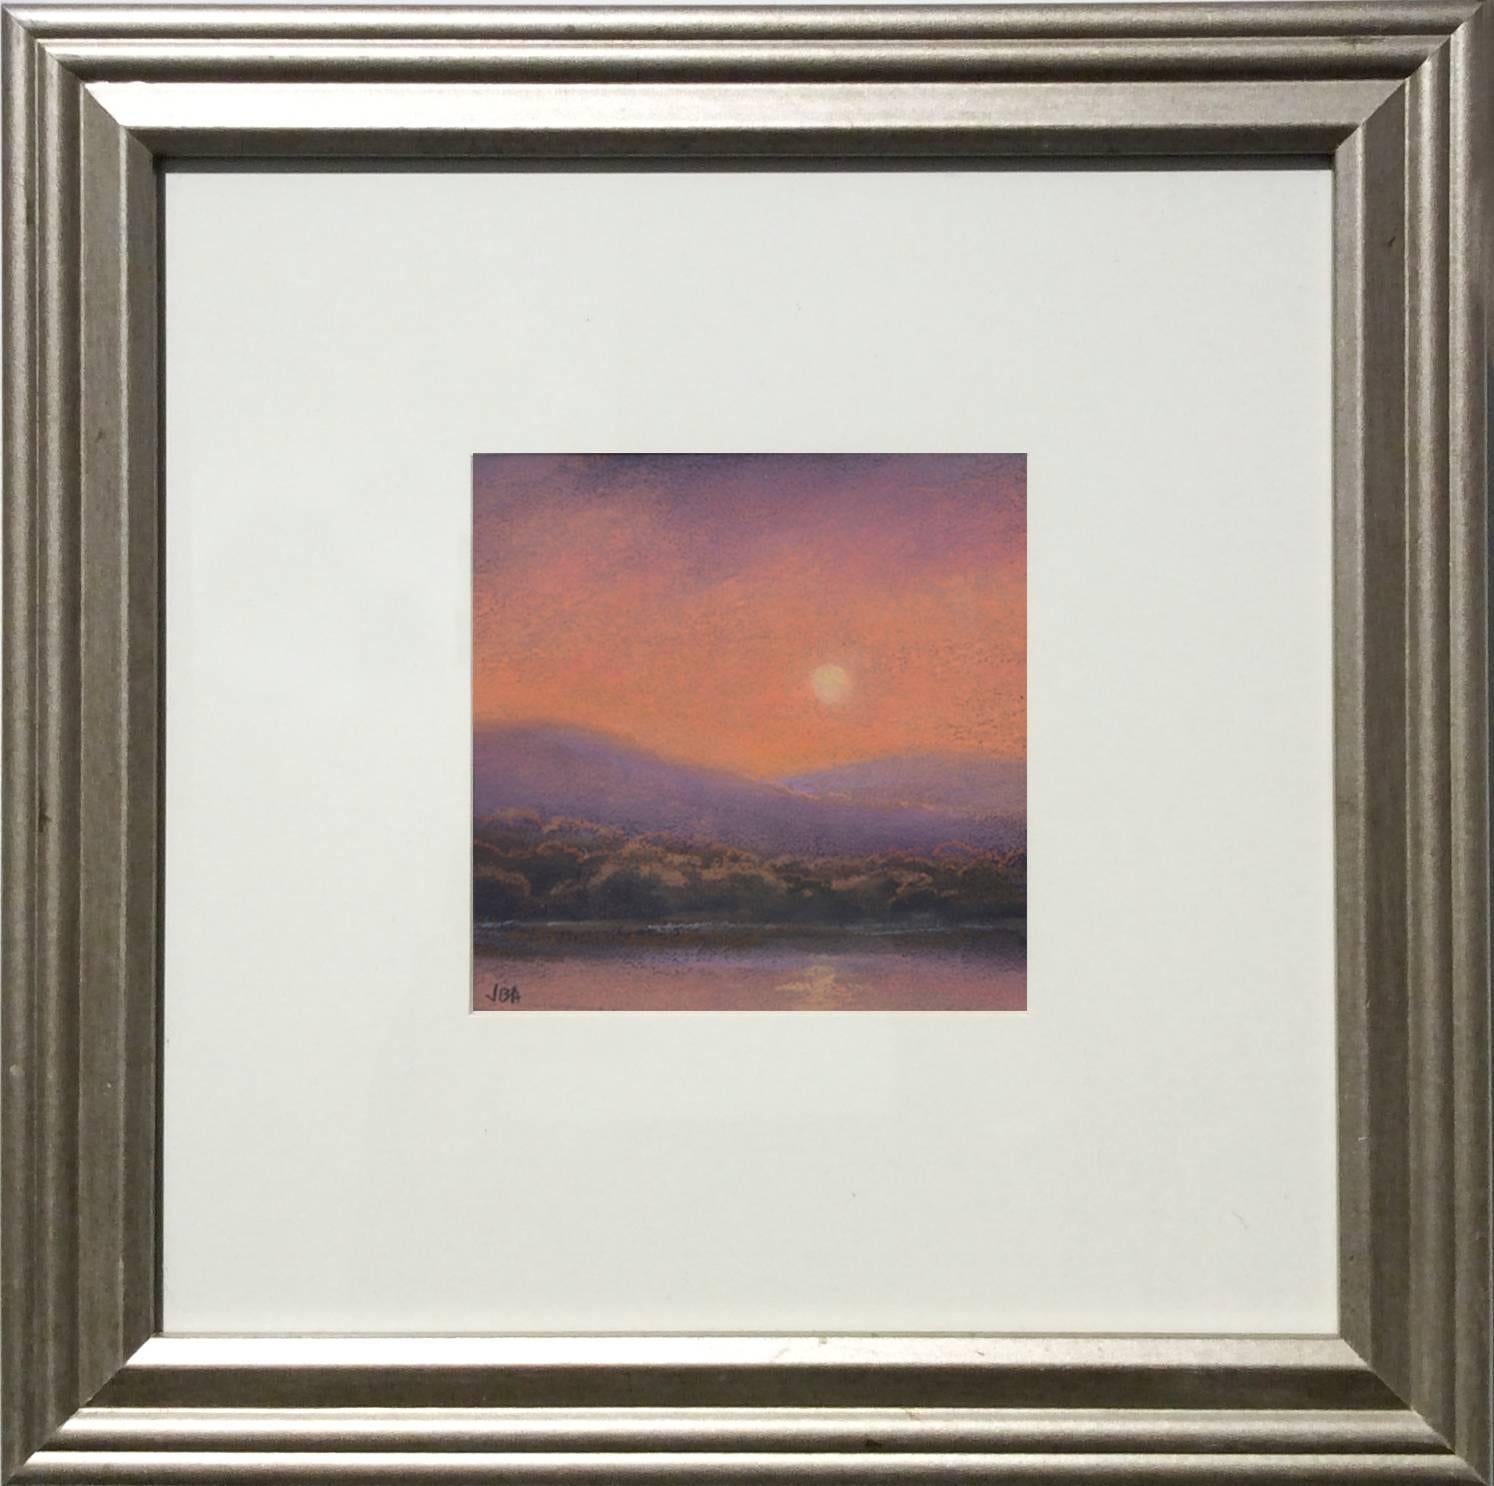 25 Series, No. 19: Landscape Drawing on Paper of a Hudson Valley Sunset - Art by Jane Bloodgood-Abrams